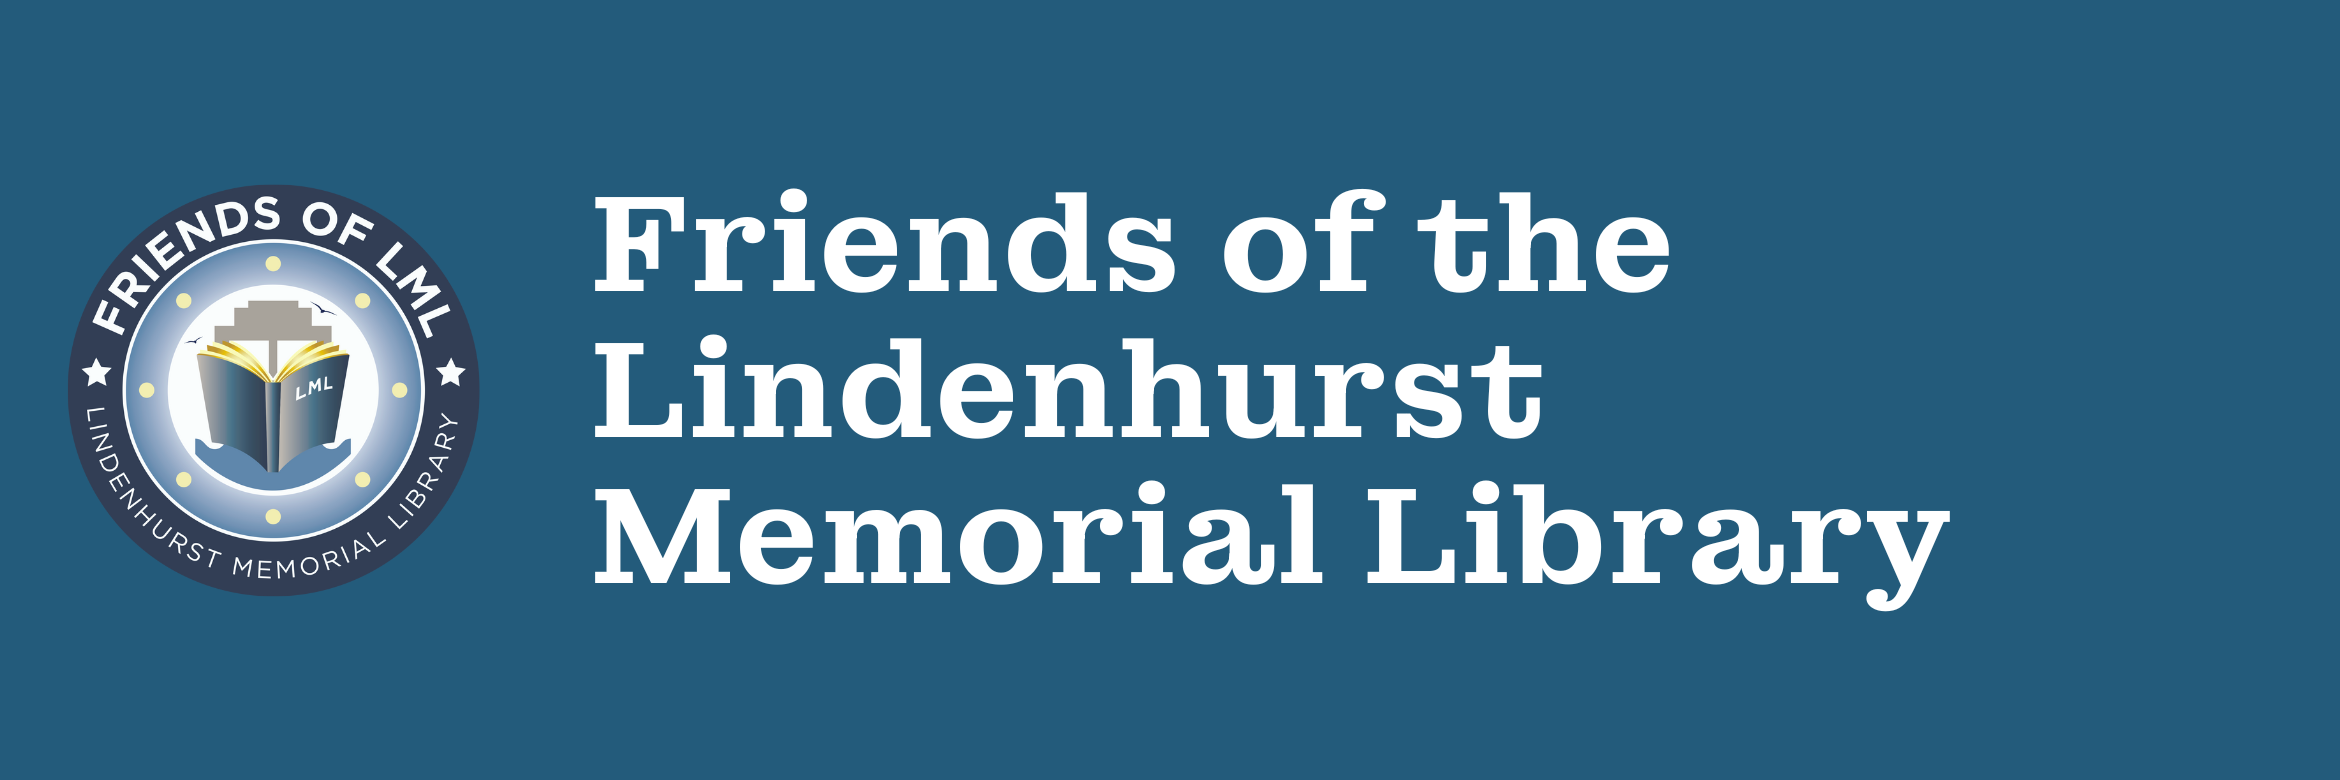 Friends of the Lindenhurst Memorial Library